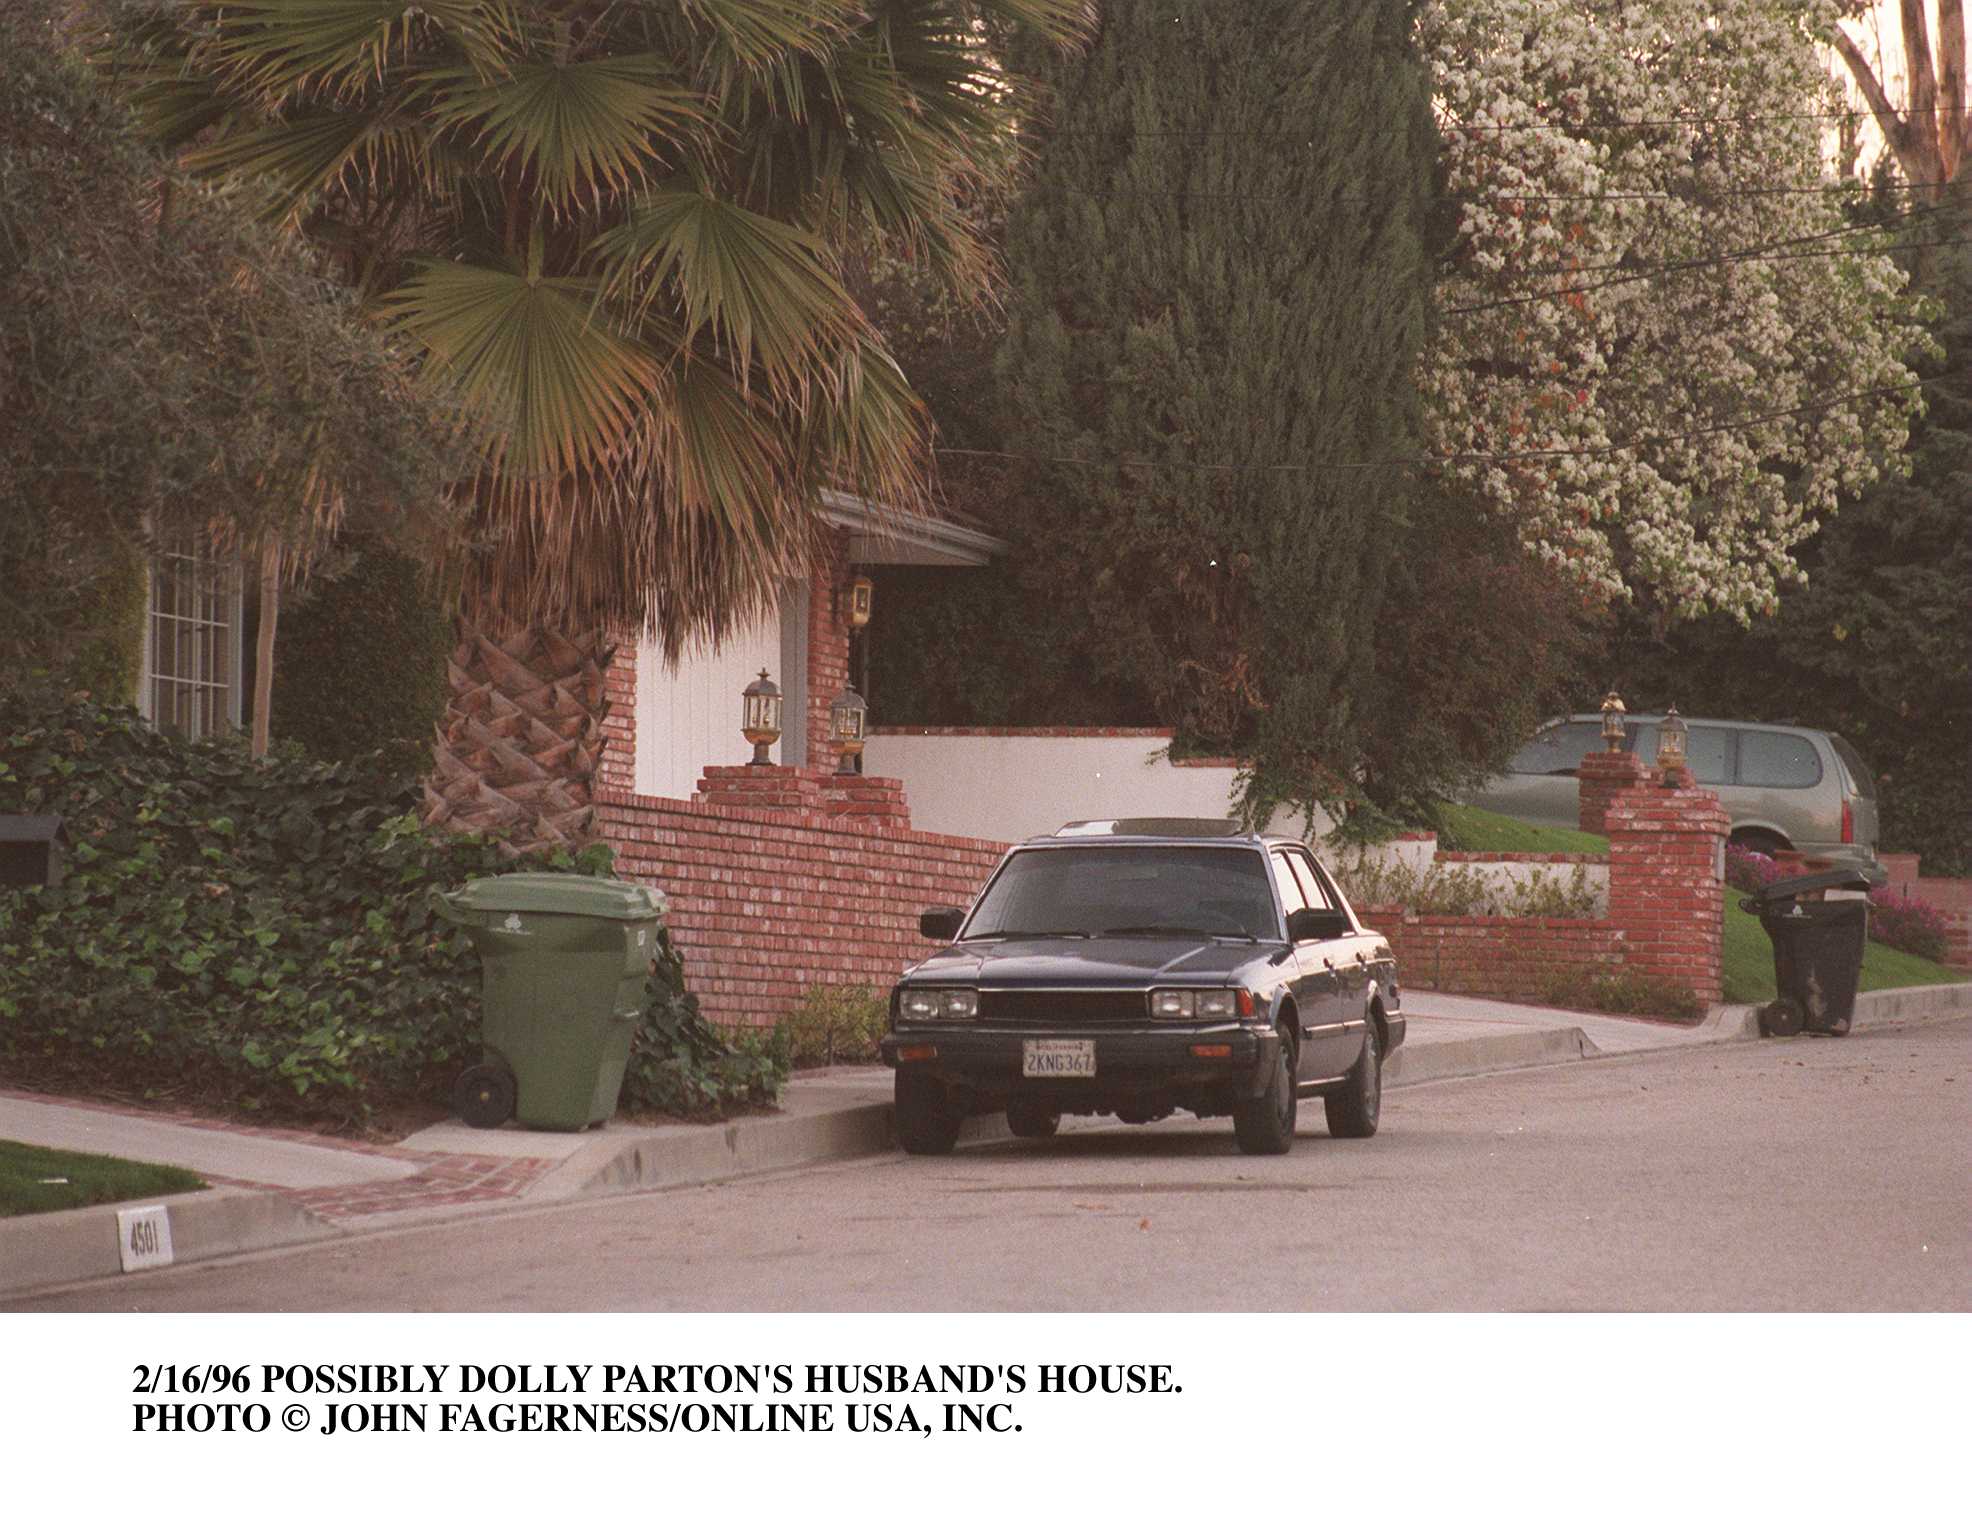 Carl Dean's house photographed on February 16, 1996 | Source: Getty Images